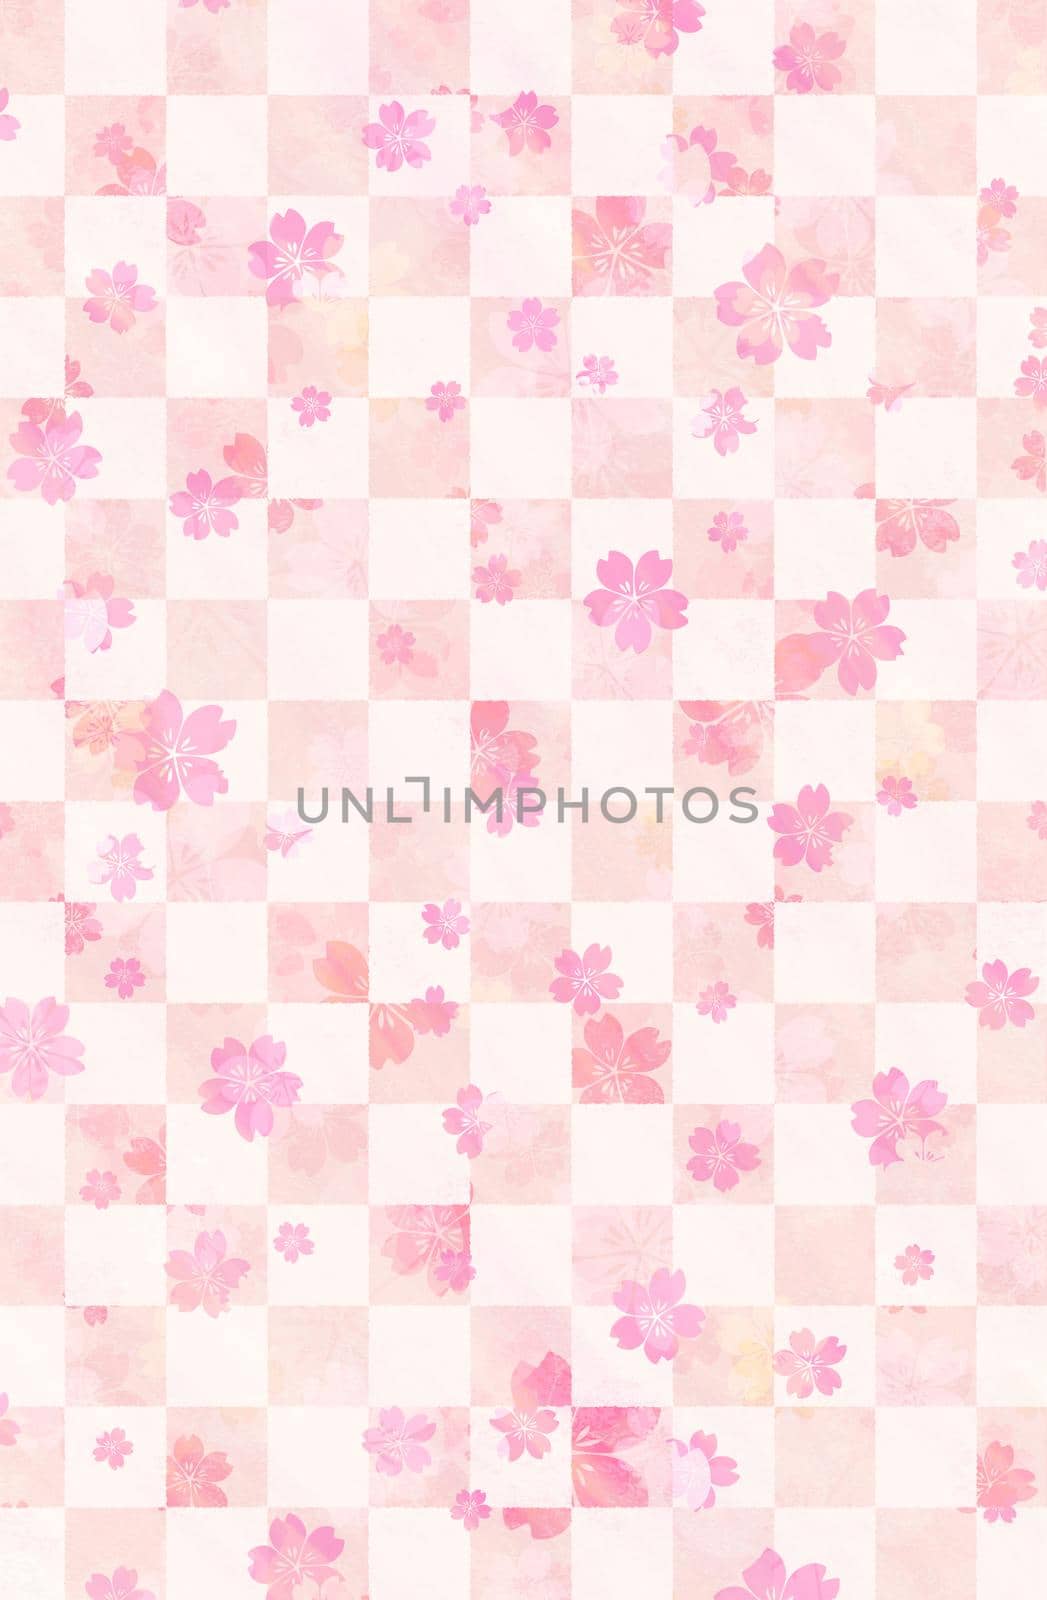 Water painting checked pattern with cherry blossoms / New year greeting card's template / spring background by barks